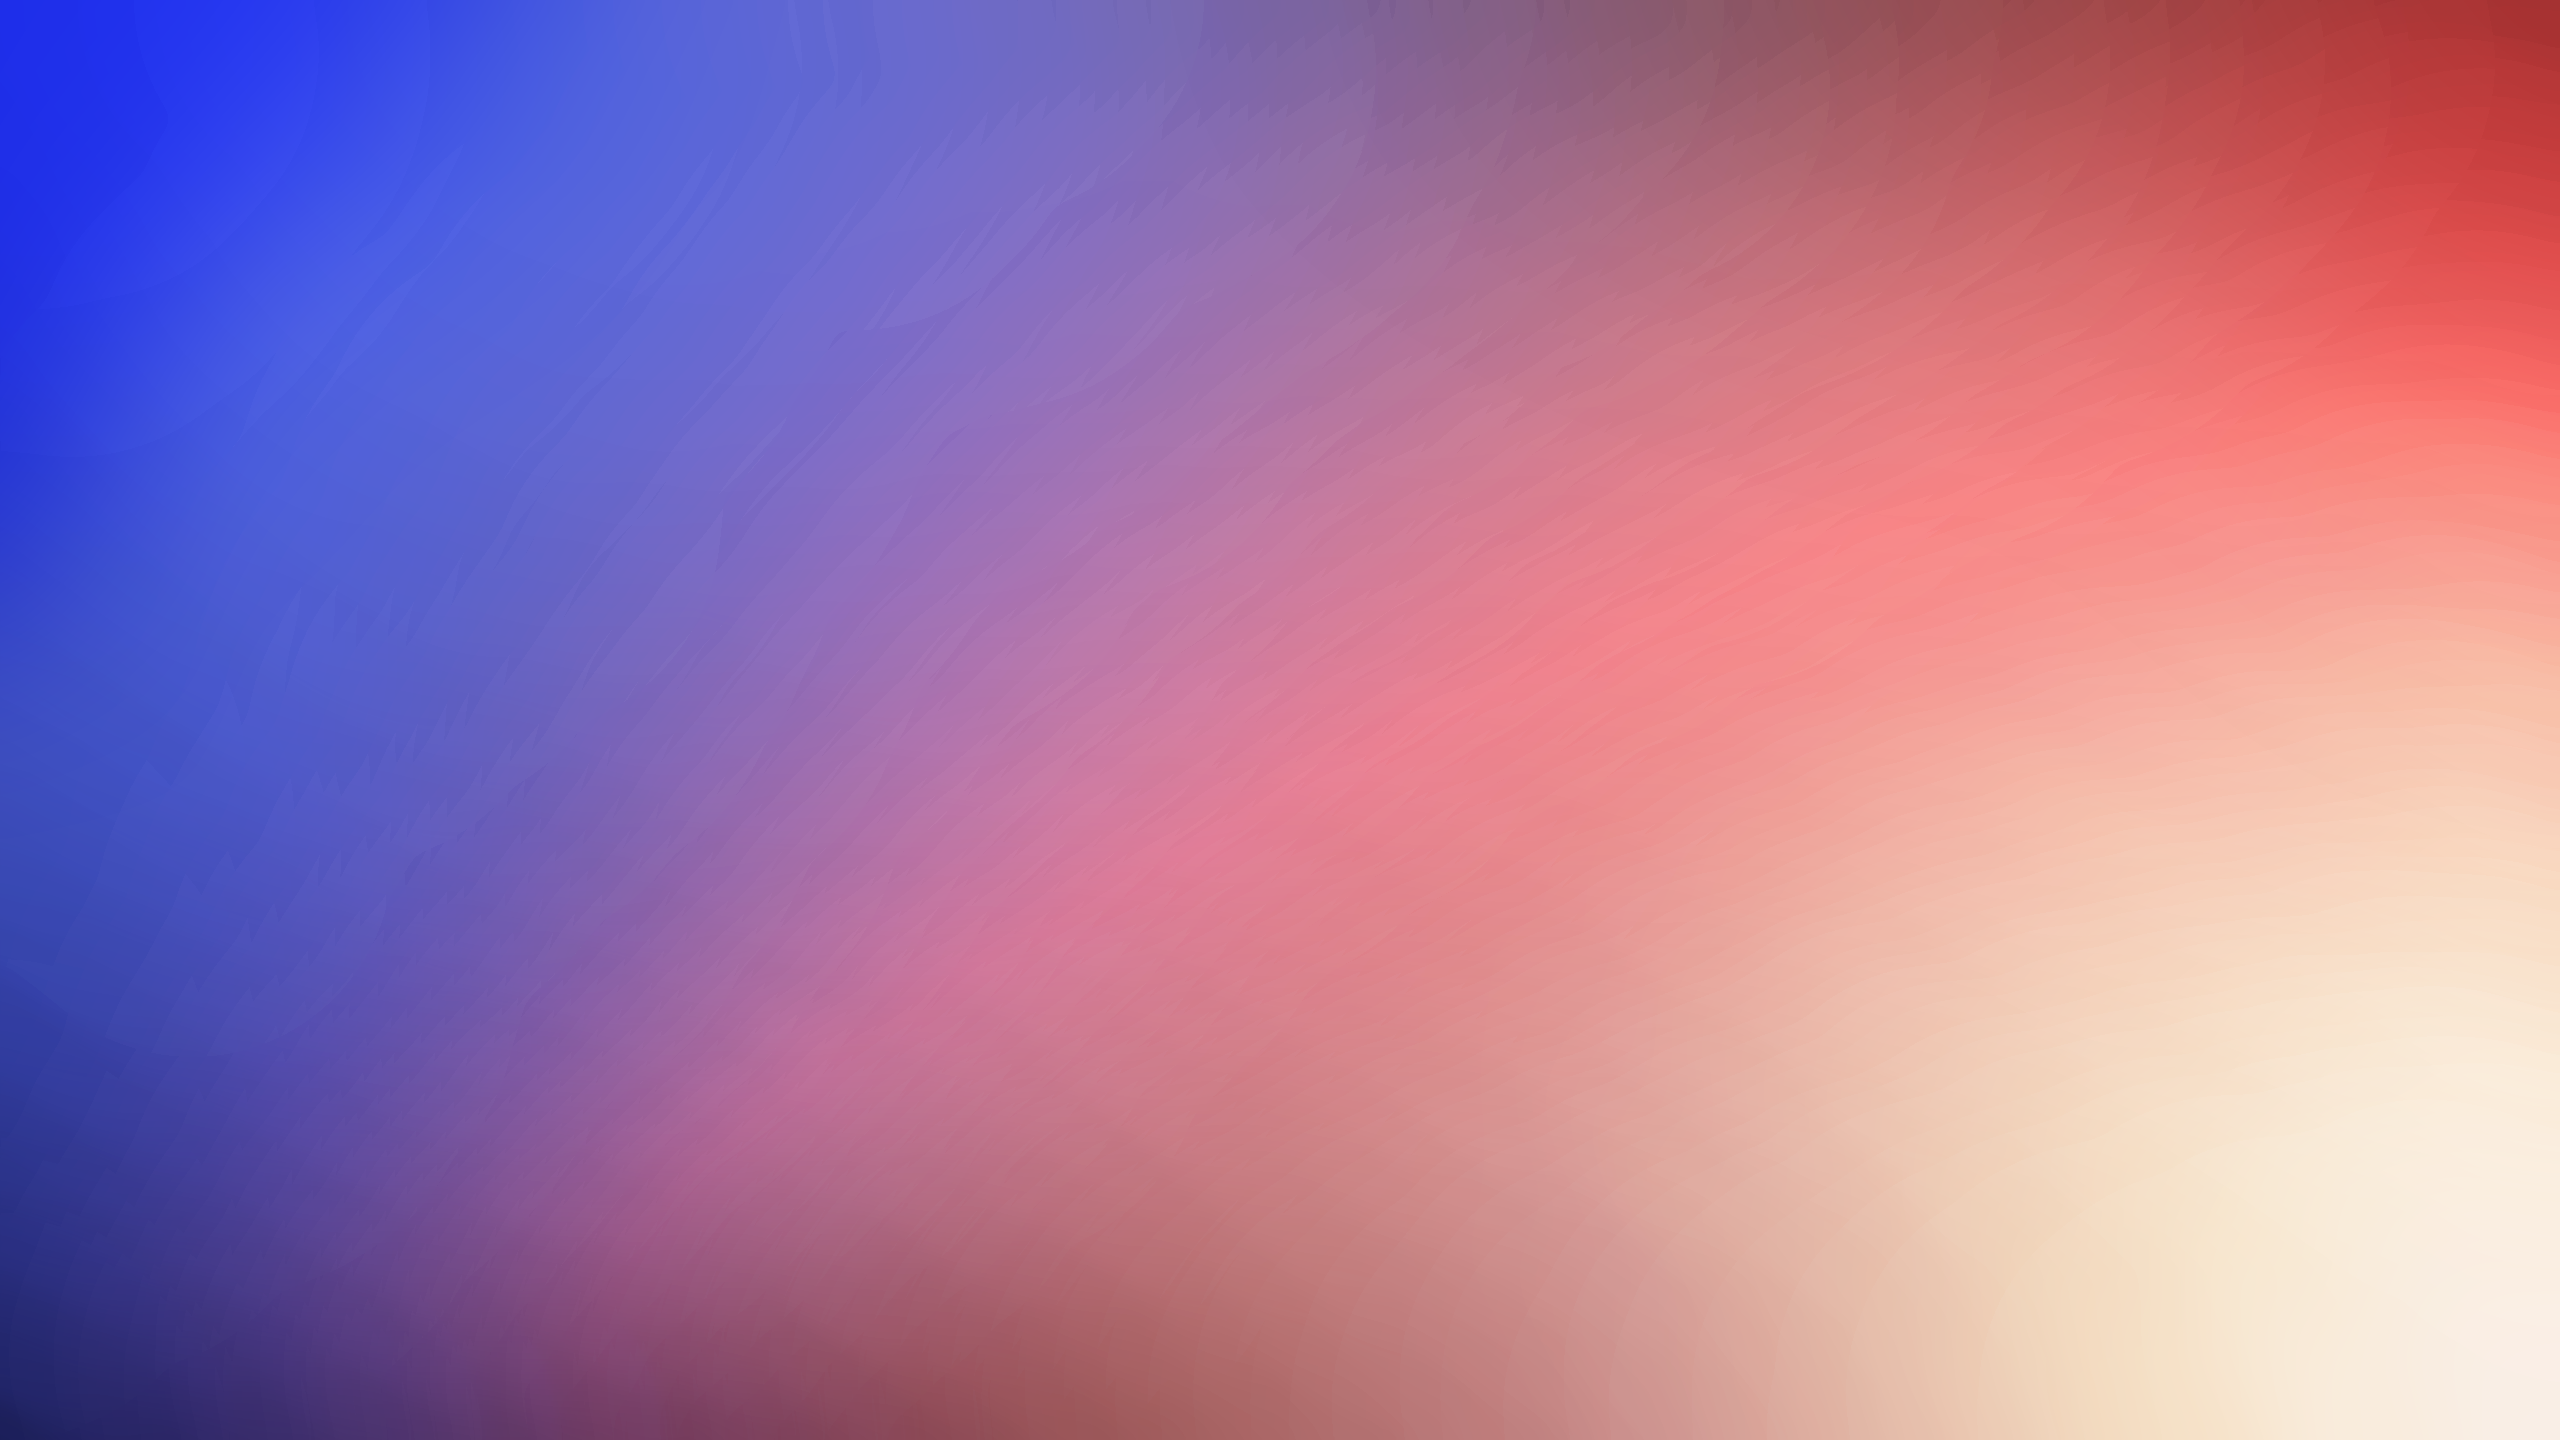 Wallpaper, sunlight, colorful, abstract, red, sky, blue, simple, texture, circle, atmosphere, pink, light, color, shape, line, petal, computer wallpaper 2560x1440